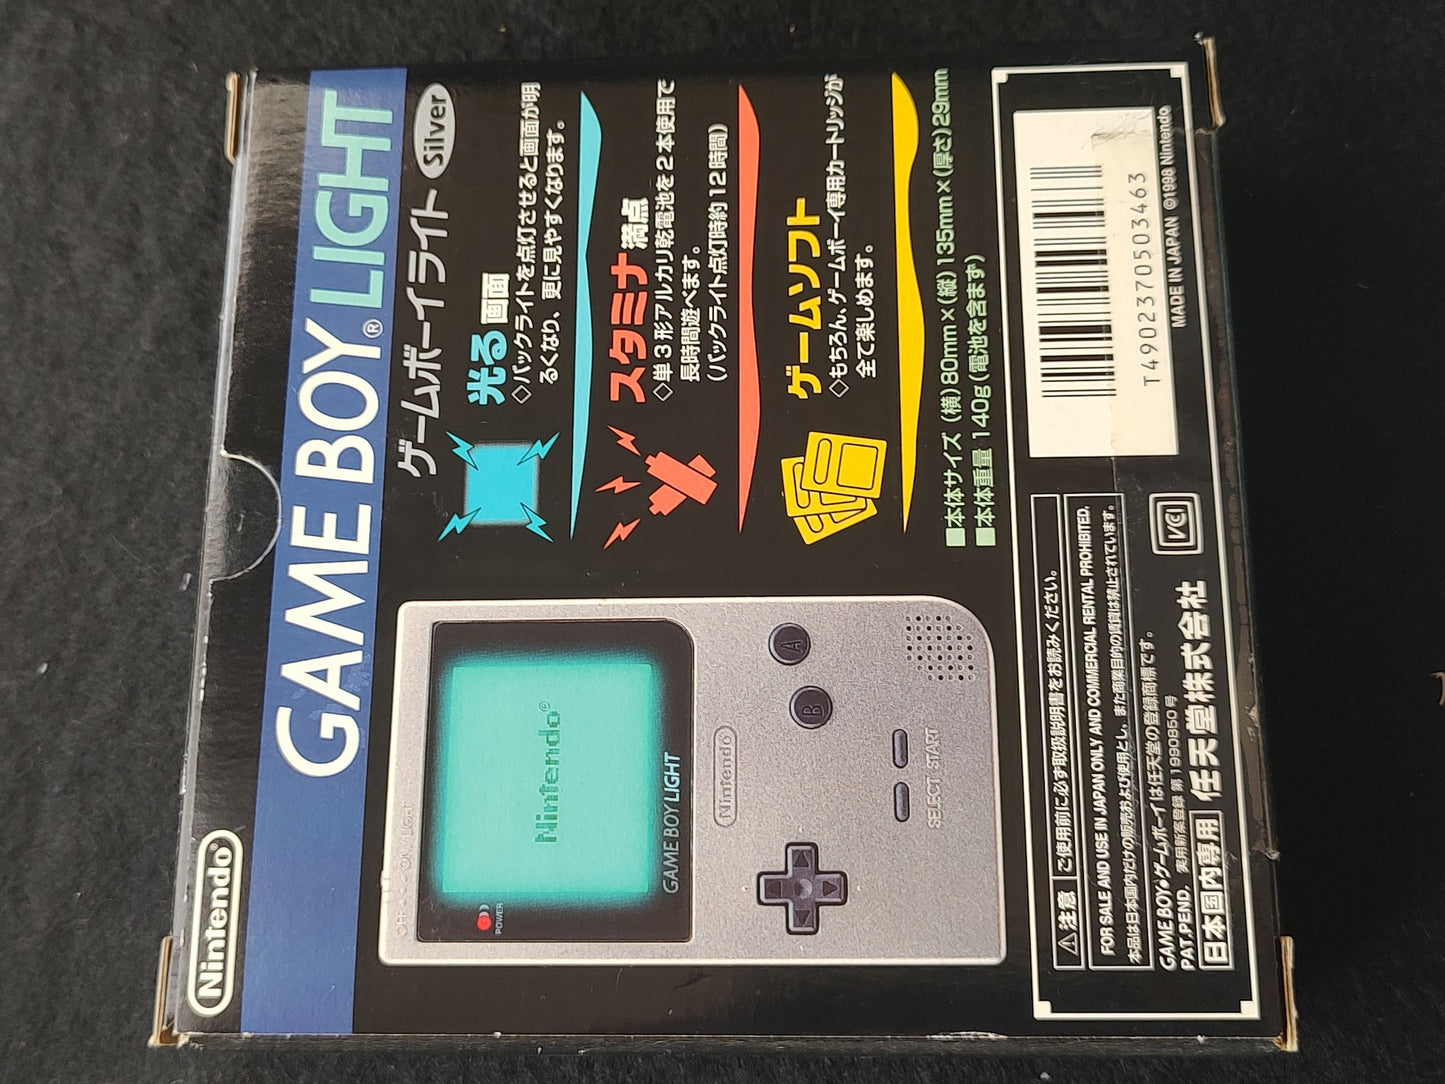 Nintendo Game boy Light Silver color console MGB-101, Manual, Boxed set-g0308-